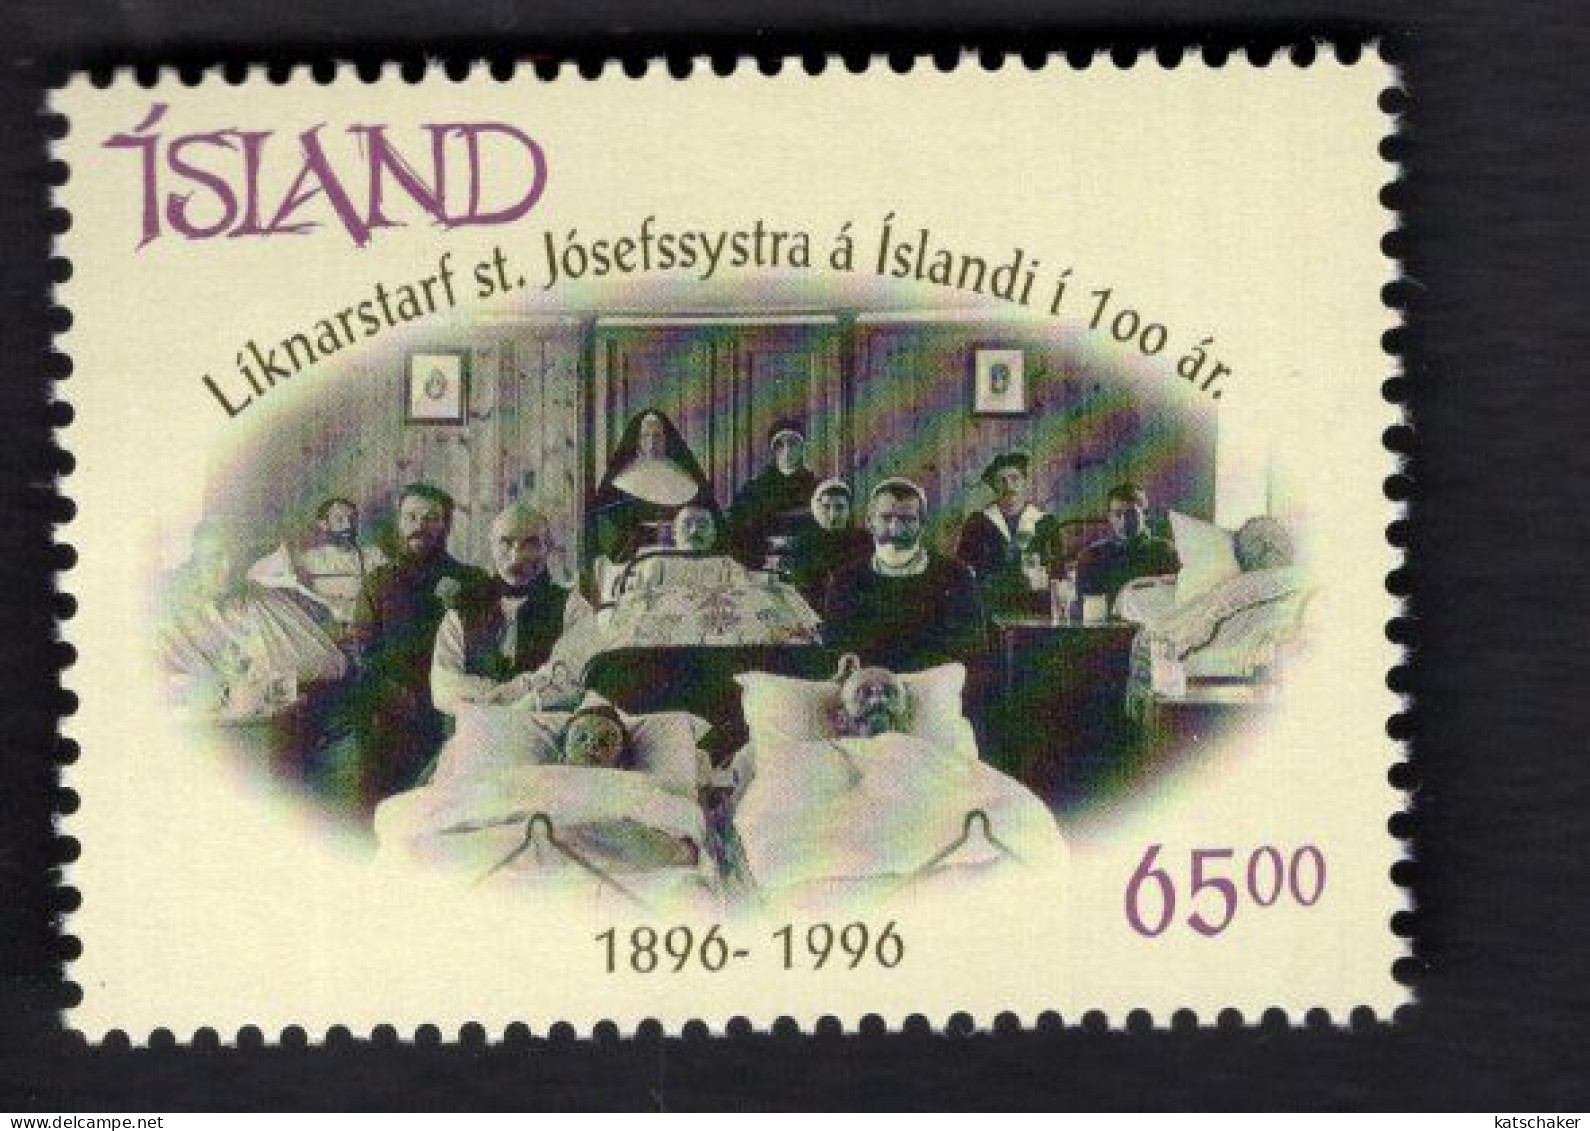 2022465560 1996 SCOTT 828 (XX)  POSTFRIS MINT NEVER HINGED - ORDER OF THE SISTERS OF ST. JOSEPH IN ICELAND - CENT. - Nuevos